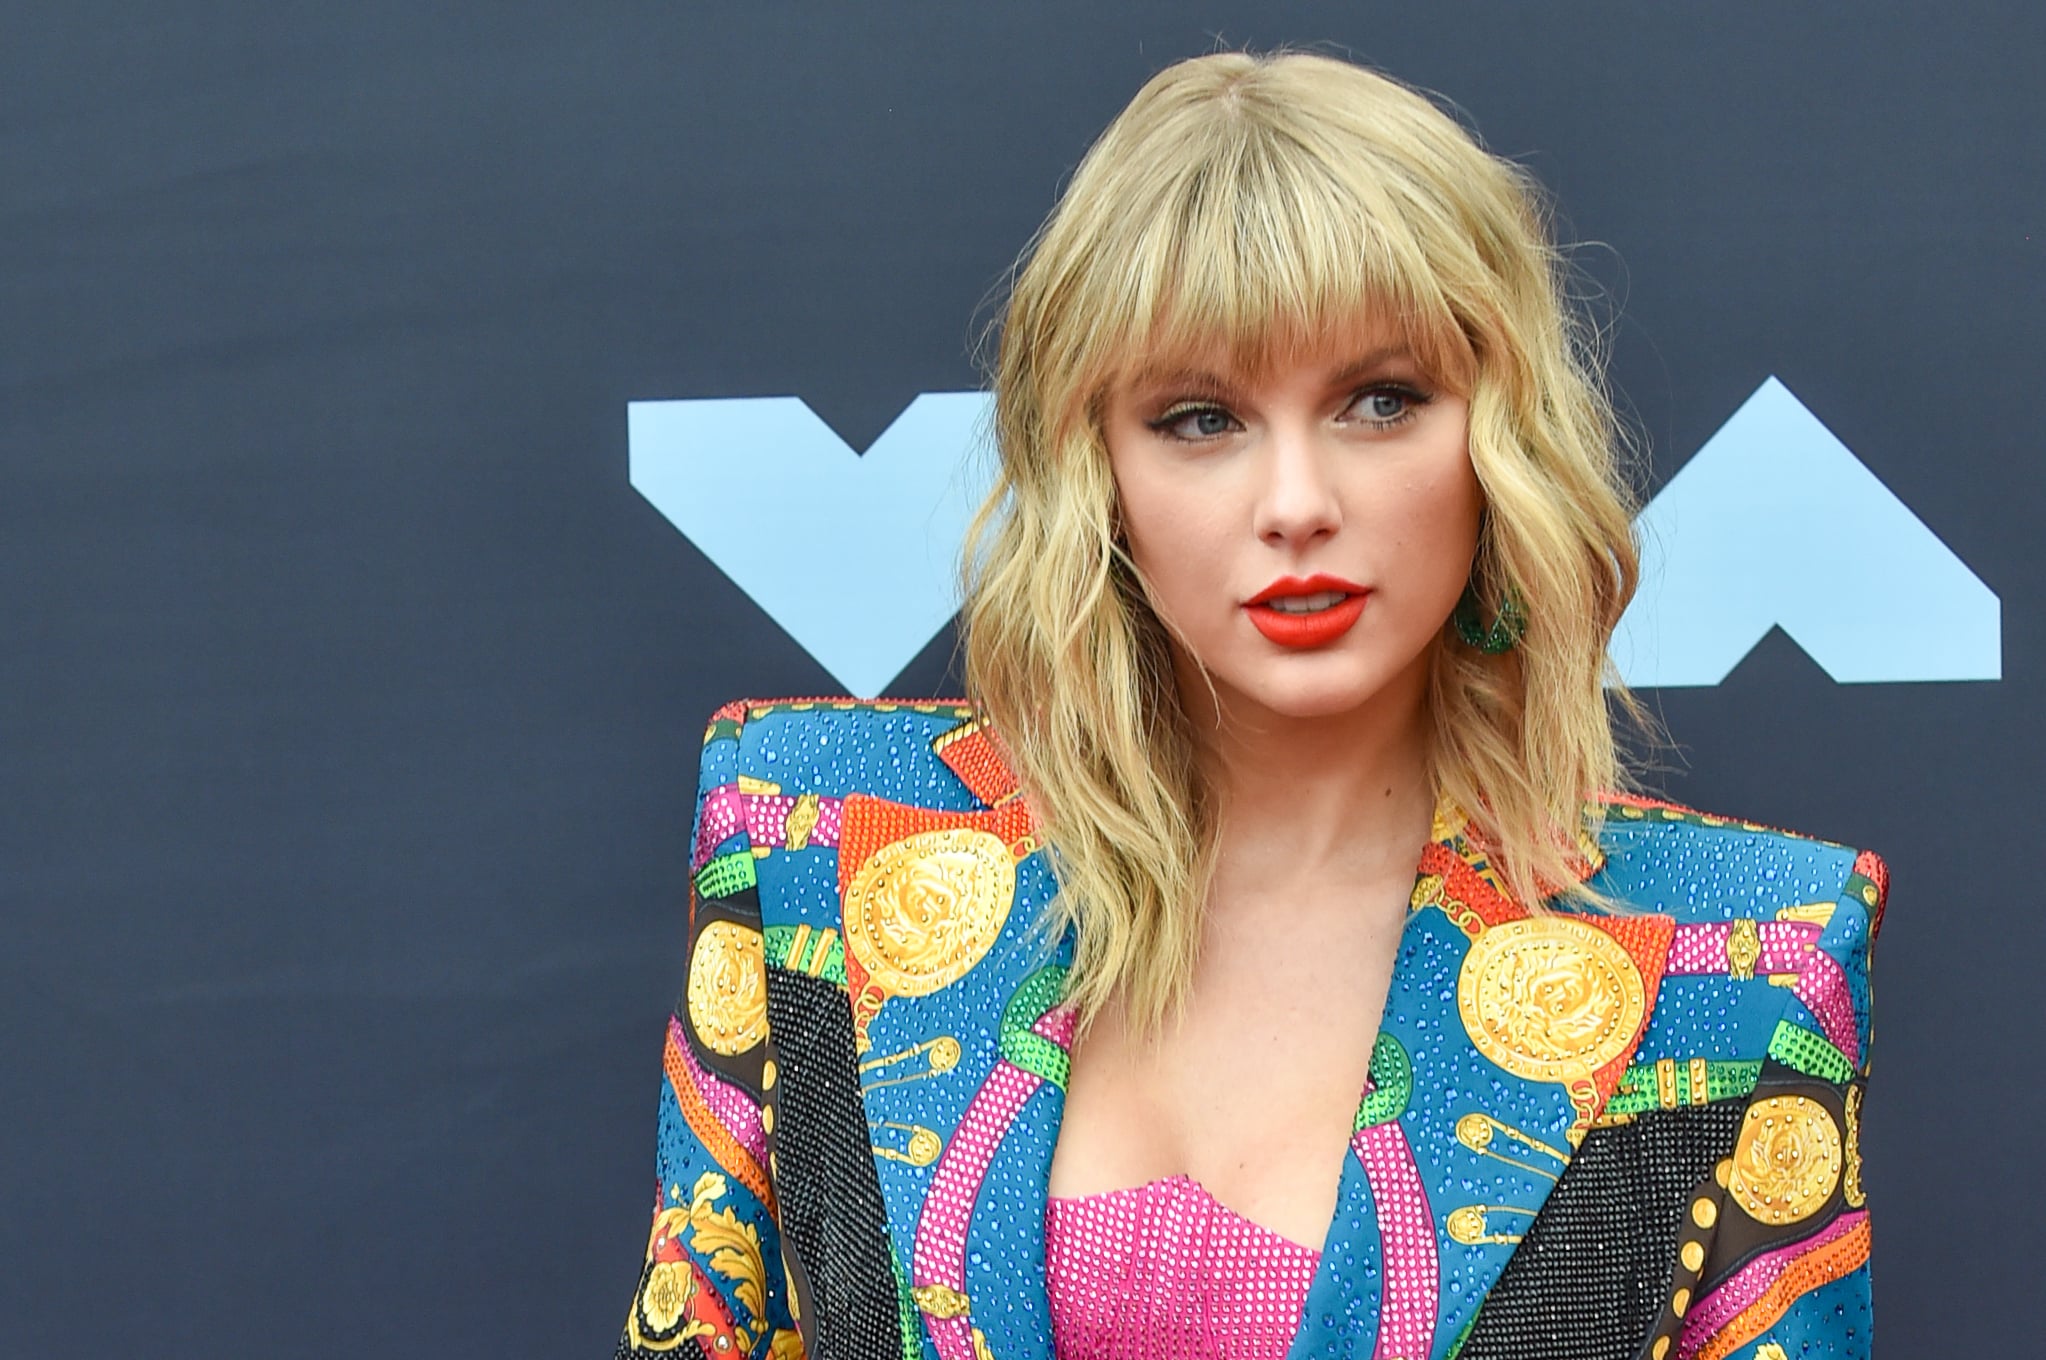 NEWARK, NEW JERSEY - AUGUST 26: Singer Taylor Swift attends the 2019 MTV Video Music Awards red carpet at Prudential Center on August 26, 2019 in Newark, New Jersey. (Photo by Aaron J. Thornton/Getty Images)